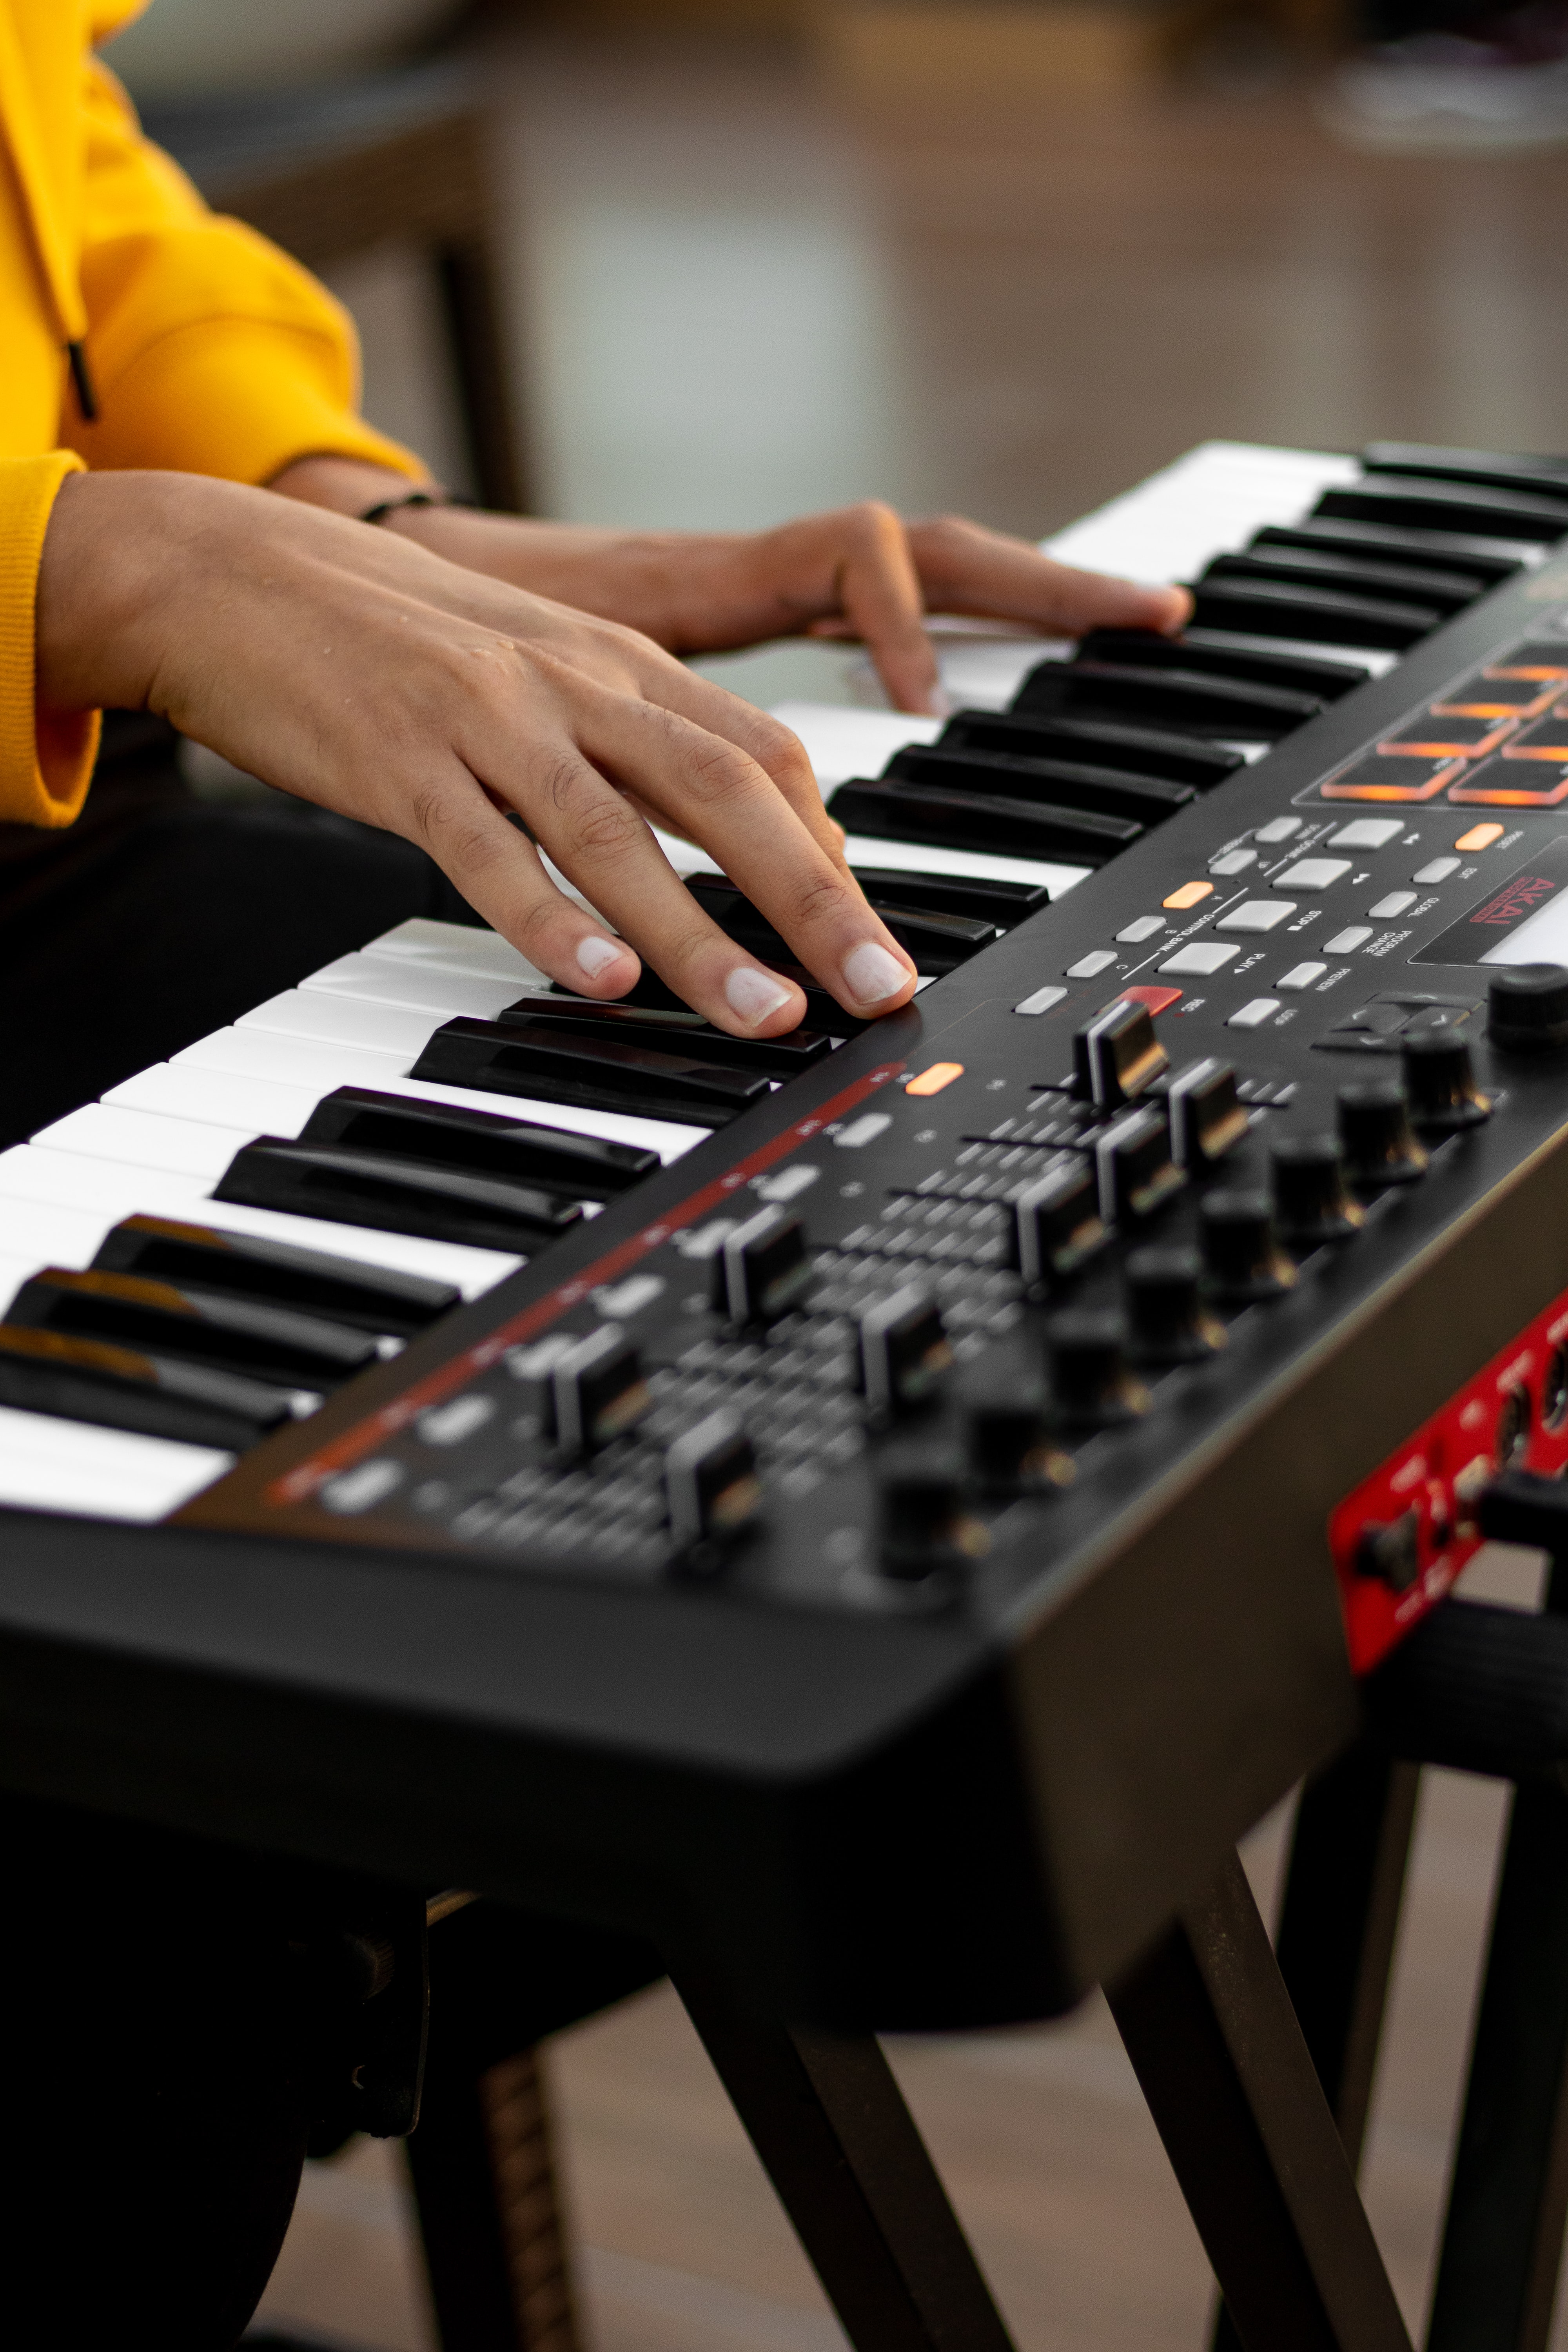 musical instrument, keys, synthesizer, music, hands